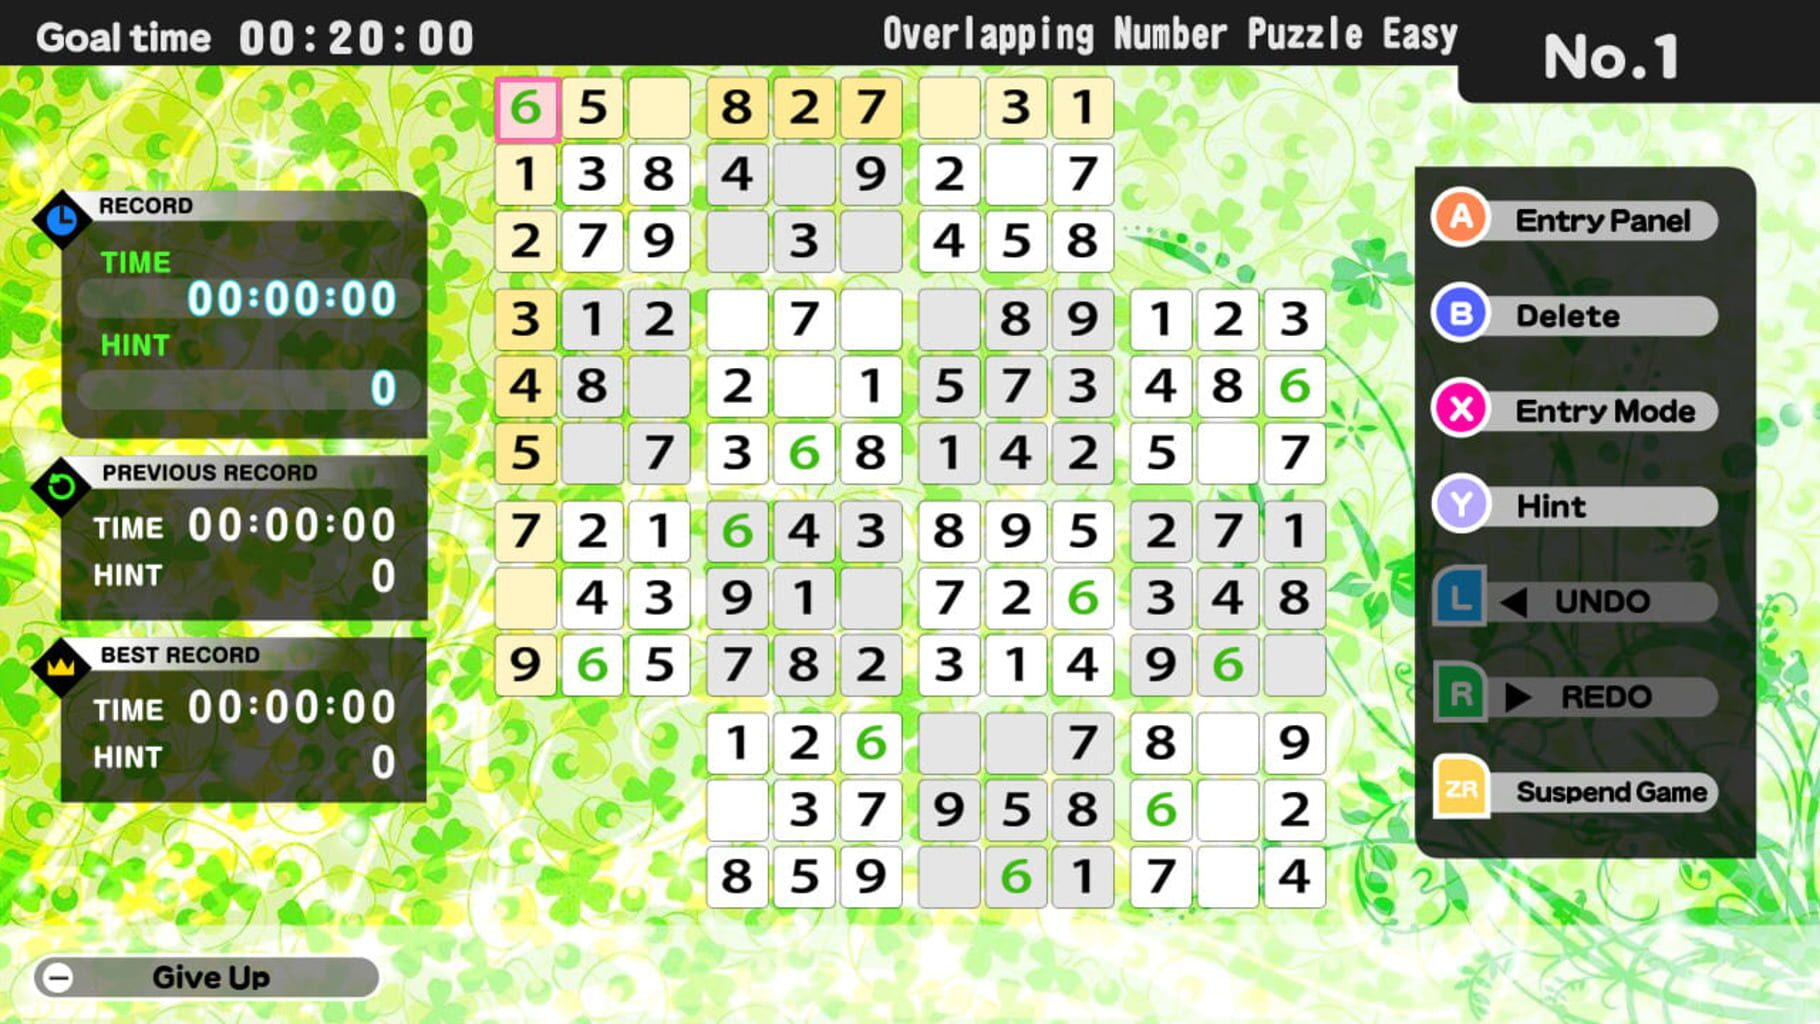 The Number Puzzle screenshot